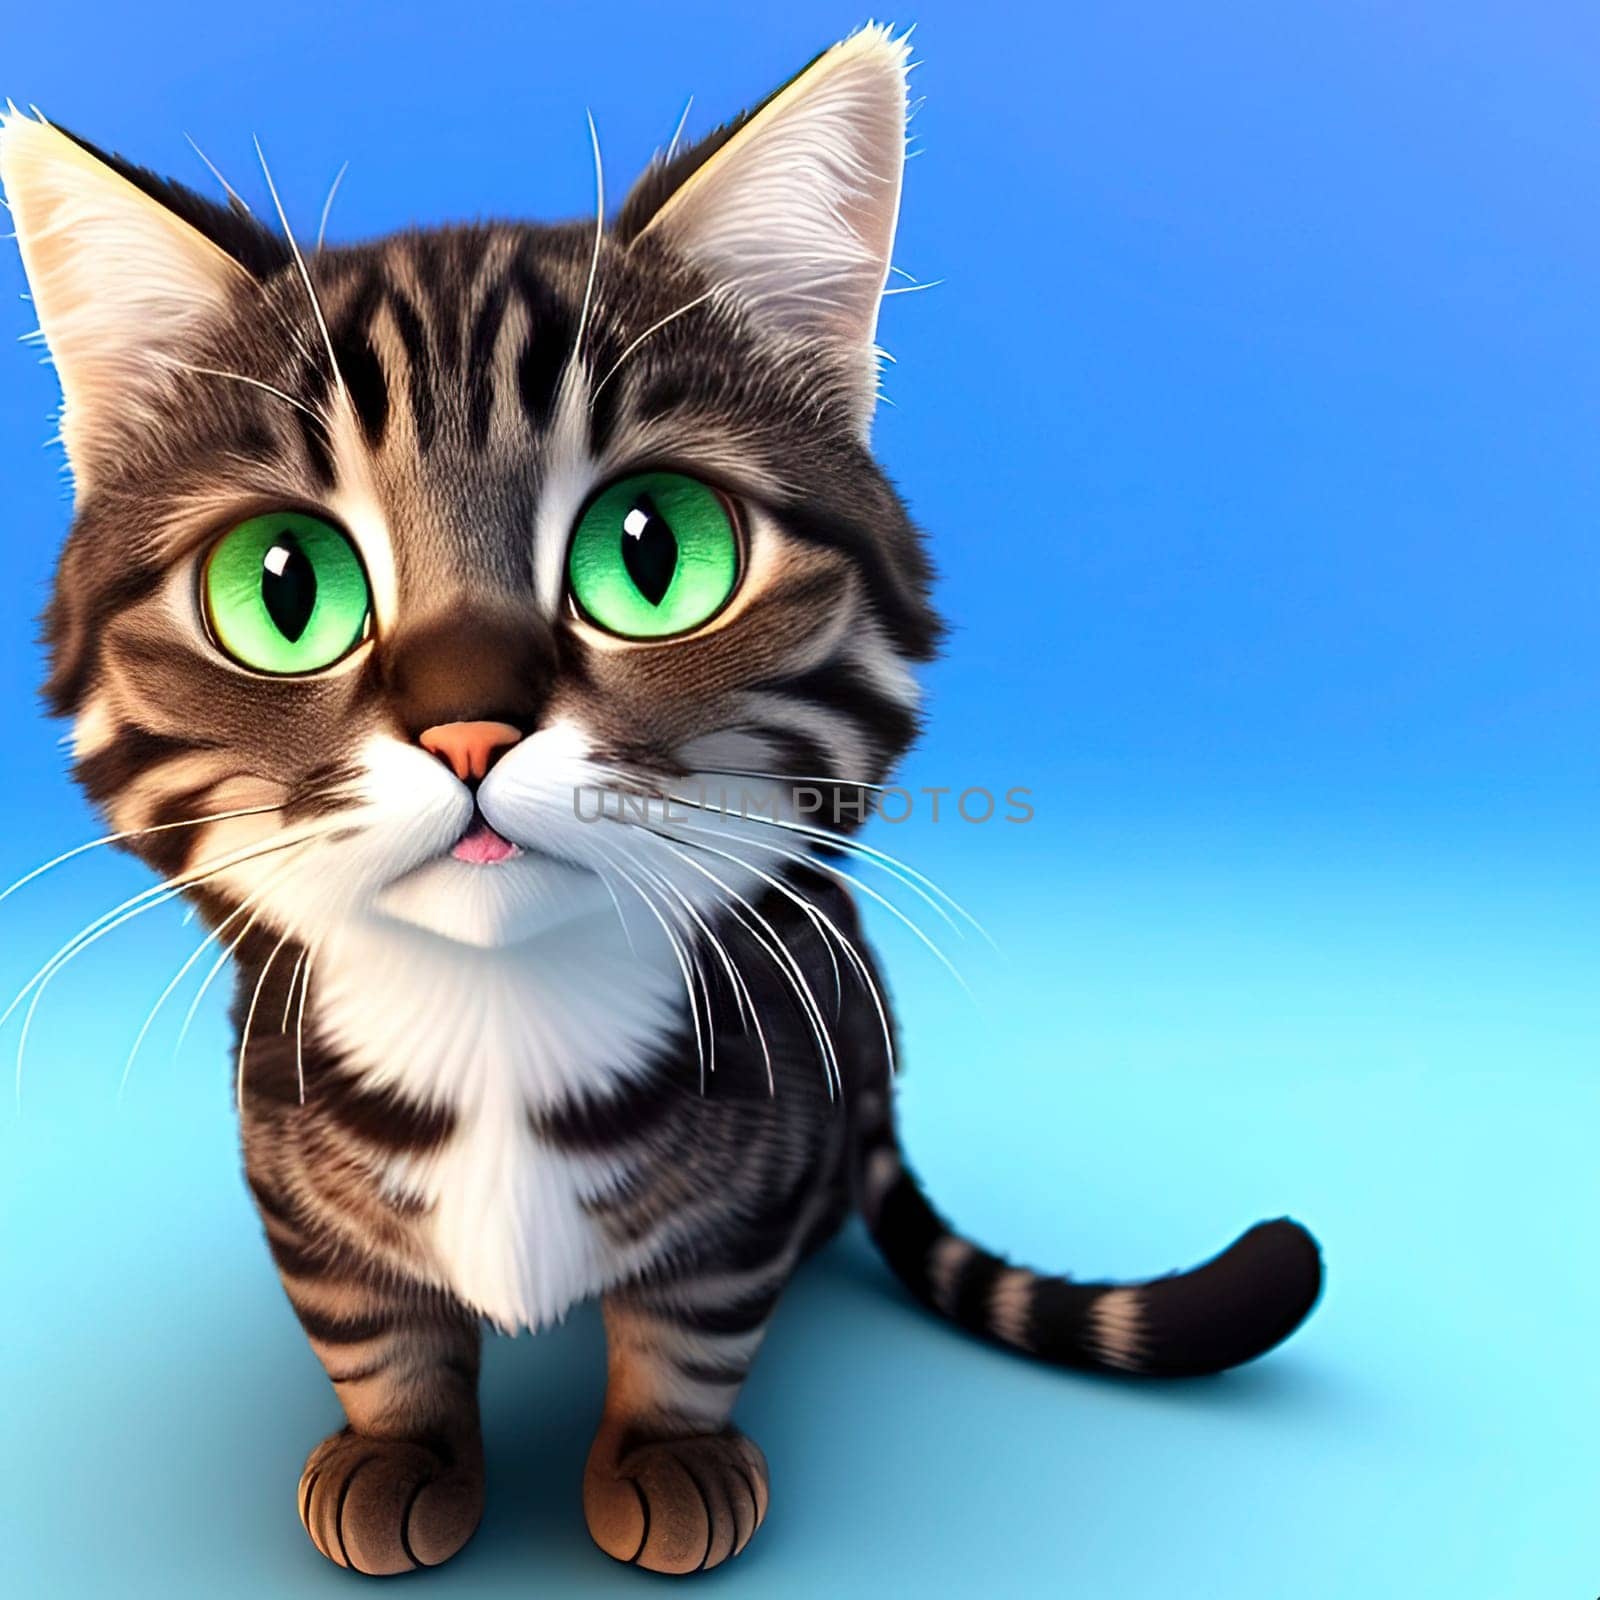 3D cute cats for calendar with cat images. Square image.